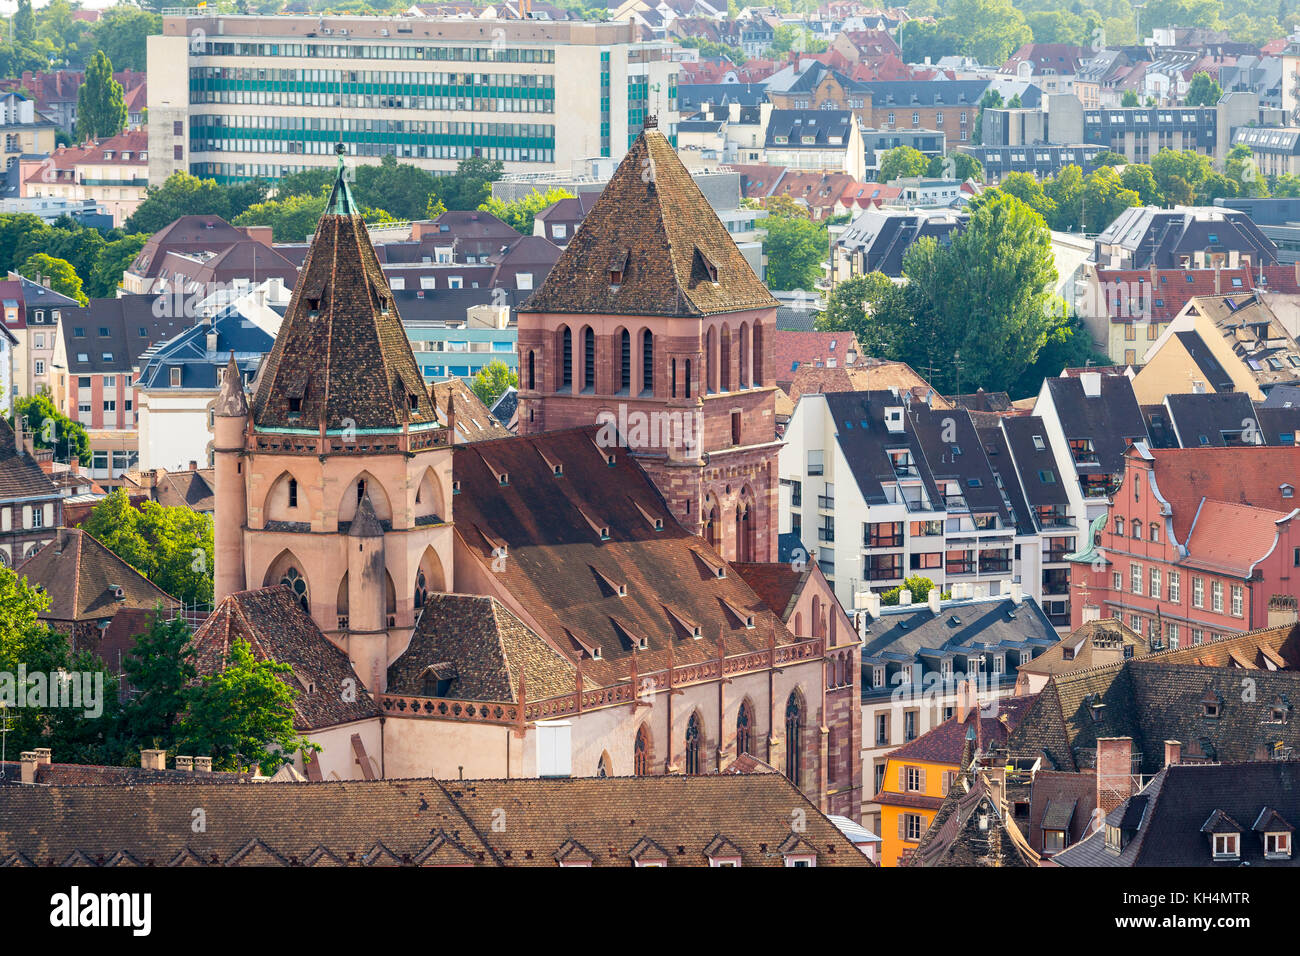 One of the biggest churches in Strasbourg is St. Thomas church, Alsace, France. Stock Photo